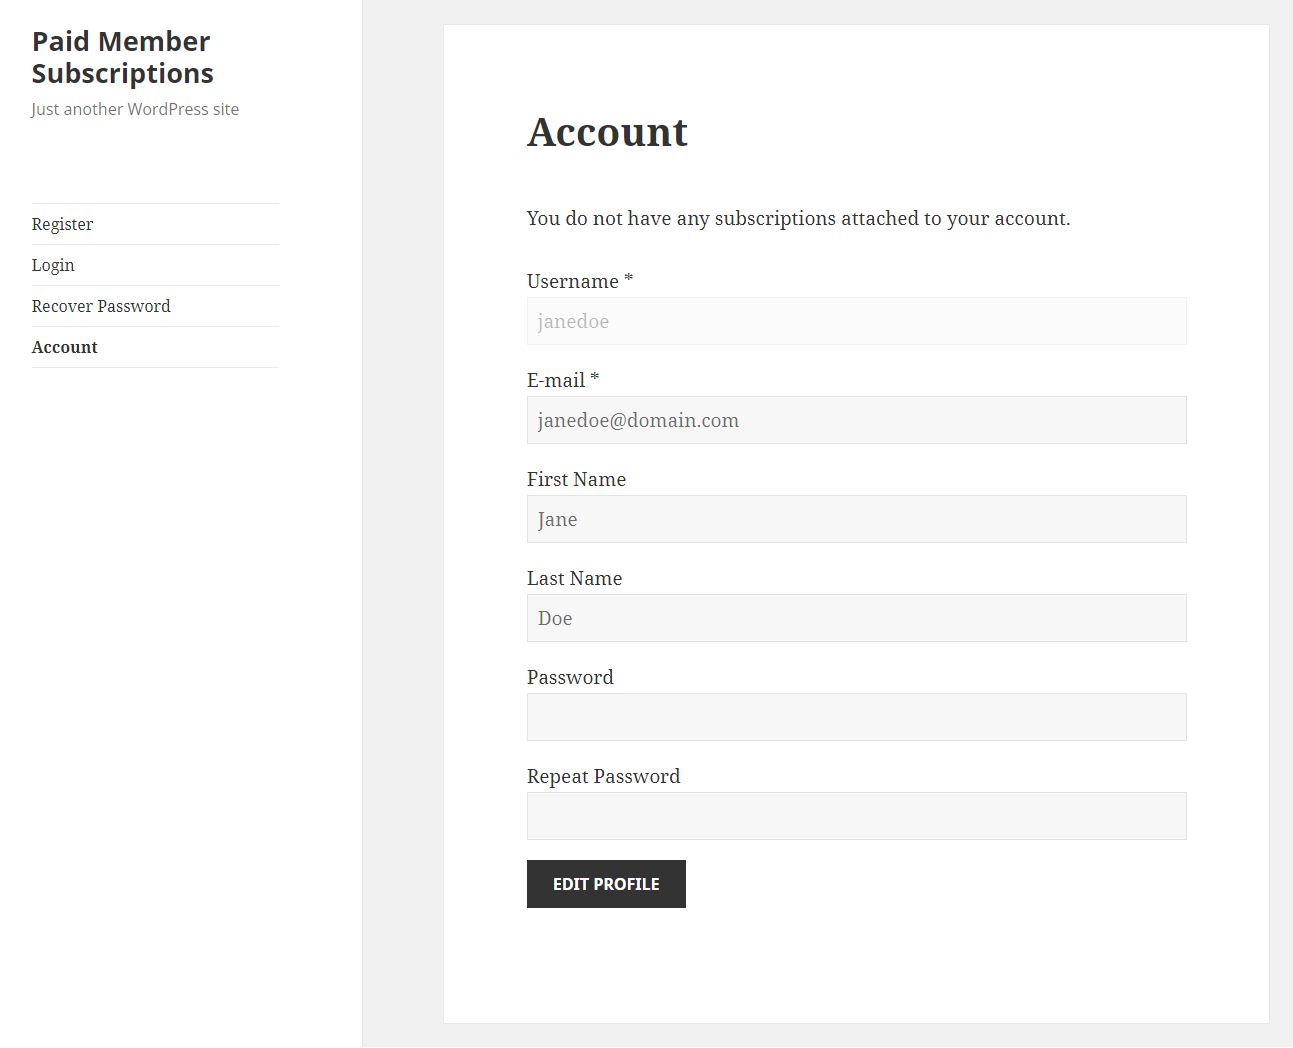 Paid Member Subscriptions Pro - Navigation Menu Filtering - Registration Form Logged Out User